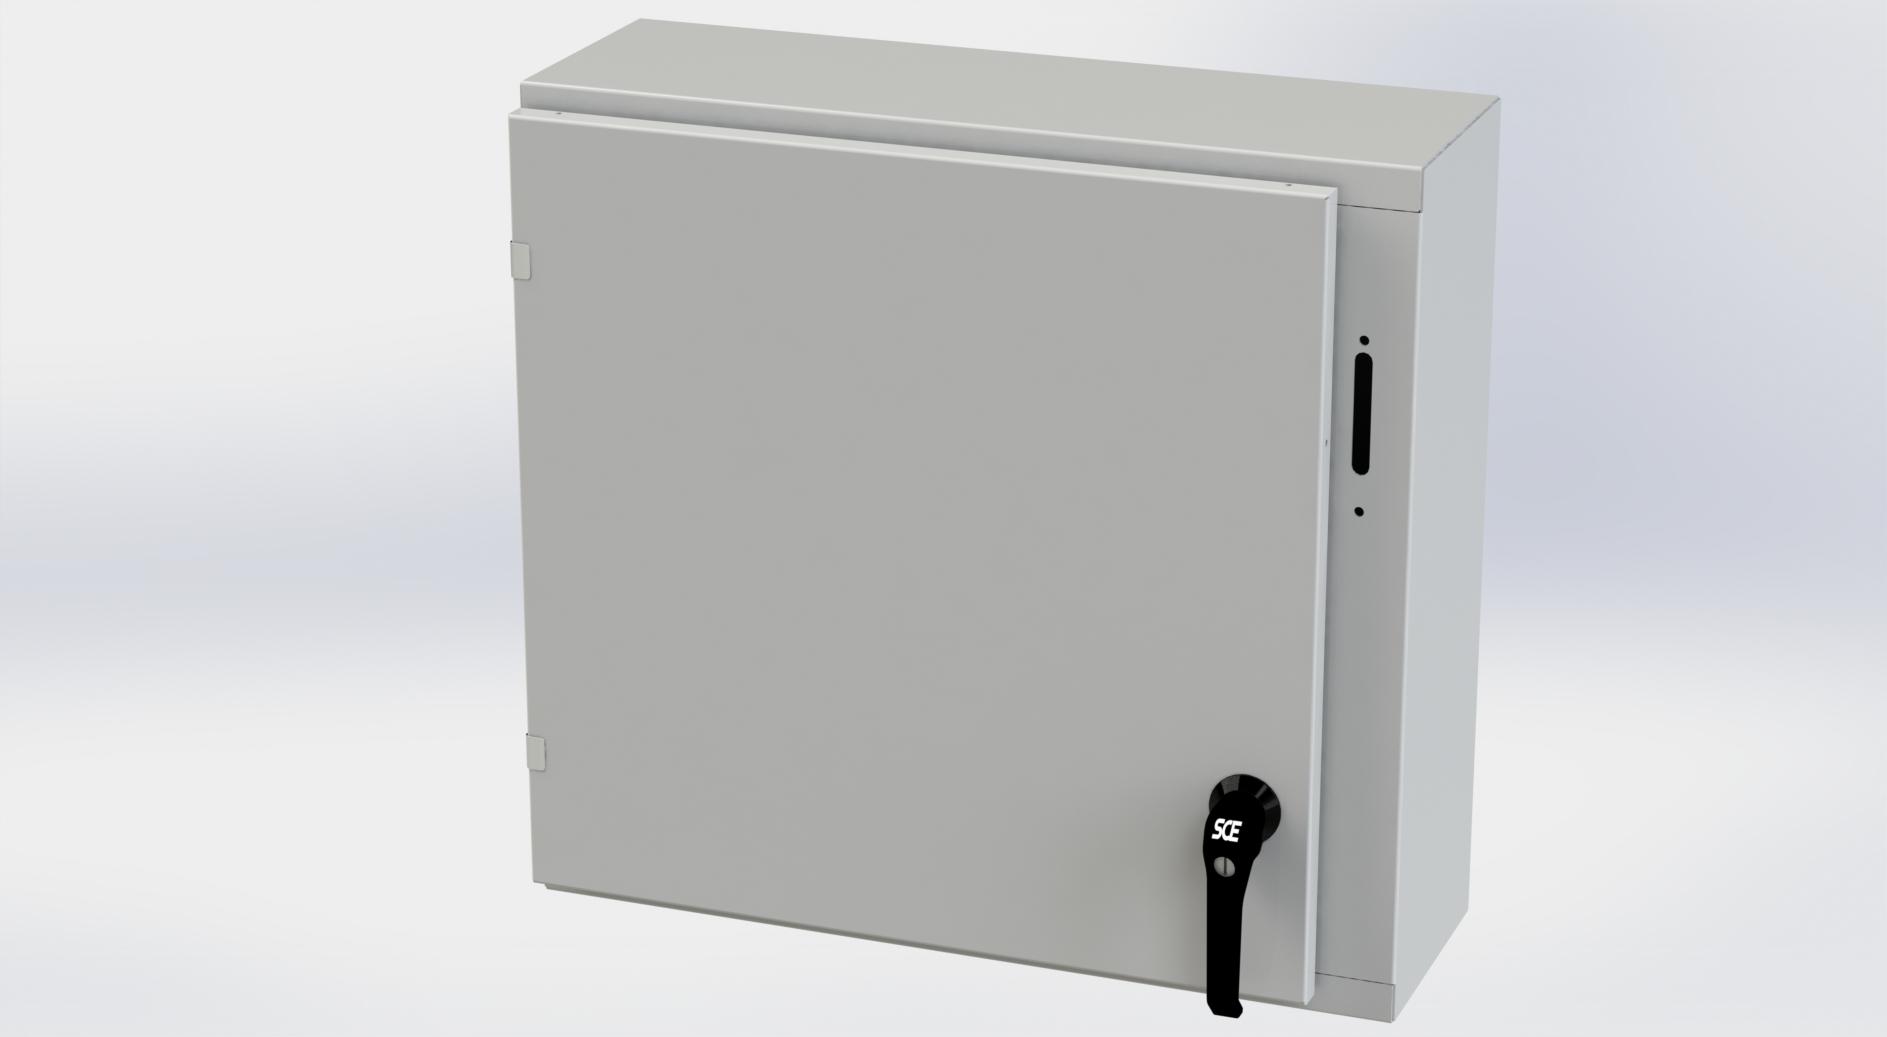 Saginaw Control SCE-24XEL2508LPLG XEL LP Enclosure, Height:24.00", Width:25.38", Depth:8.00", RAL 7035 gray powder coating inside and out. Optional sub-panels are powder coated white.